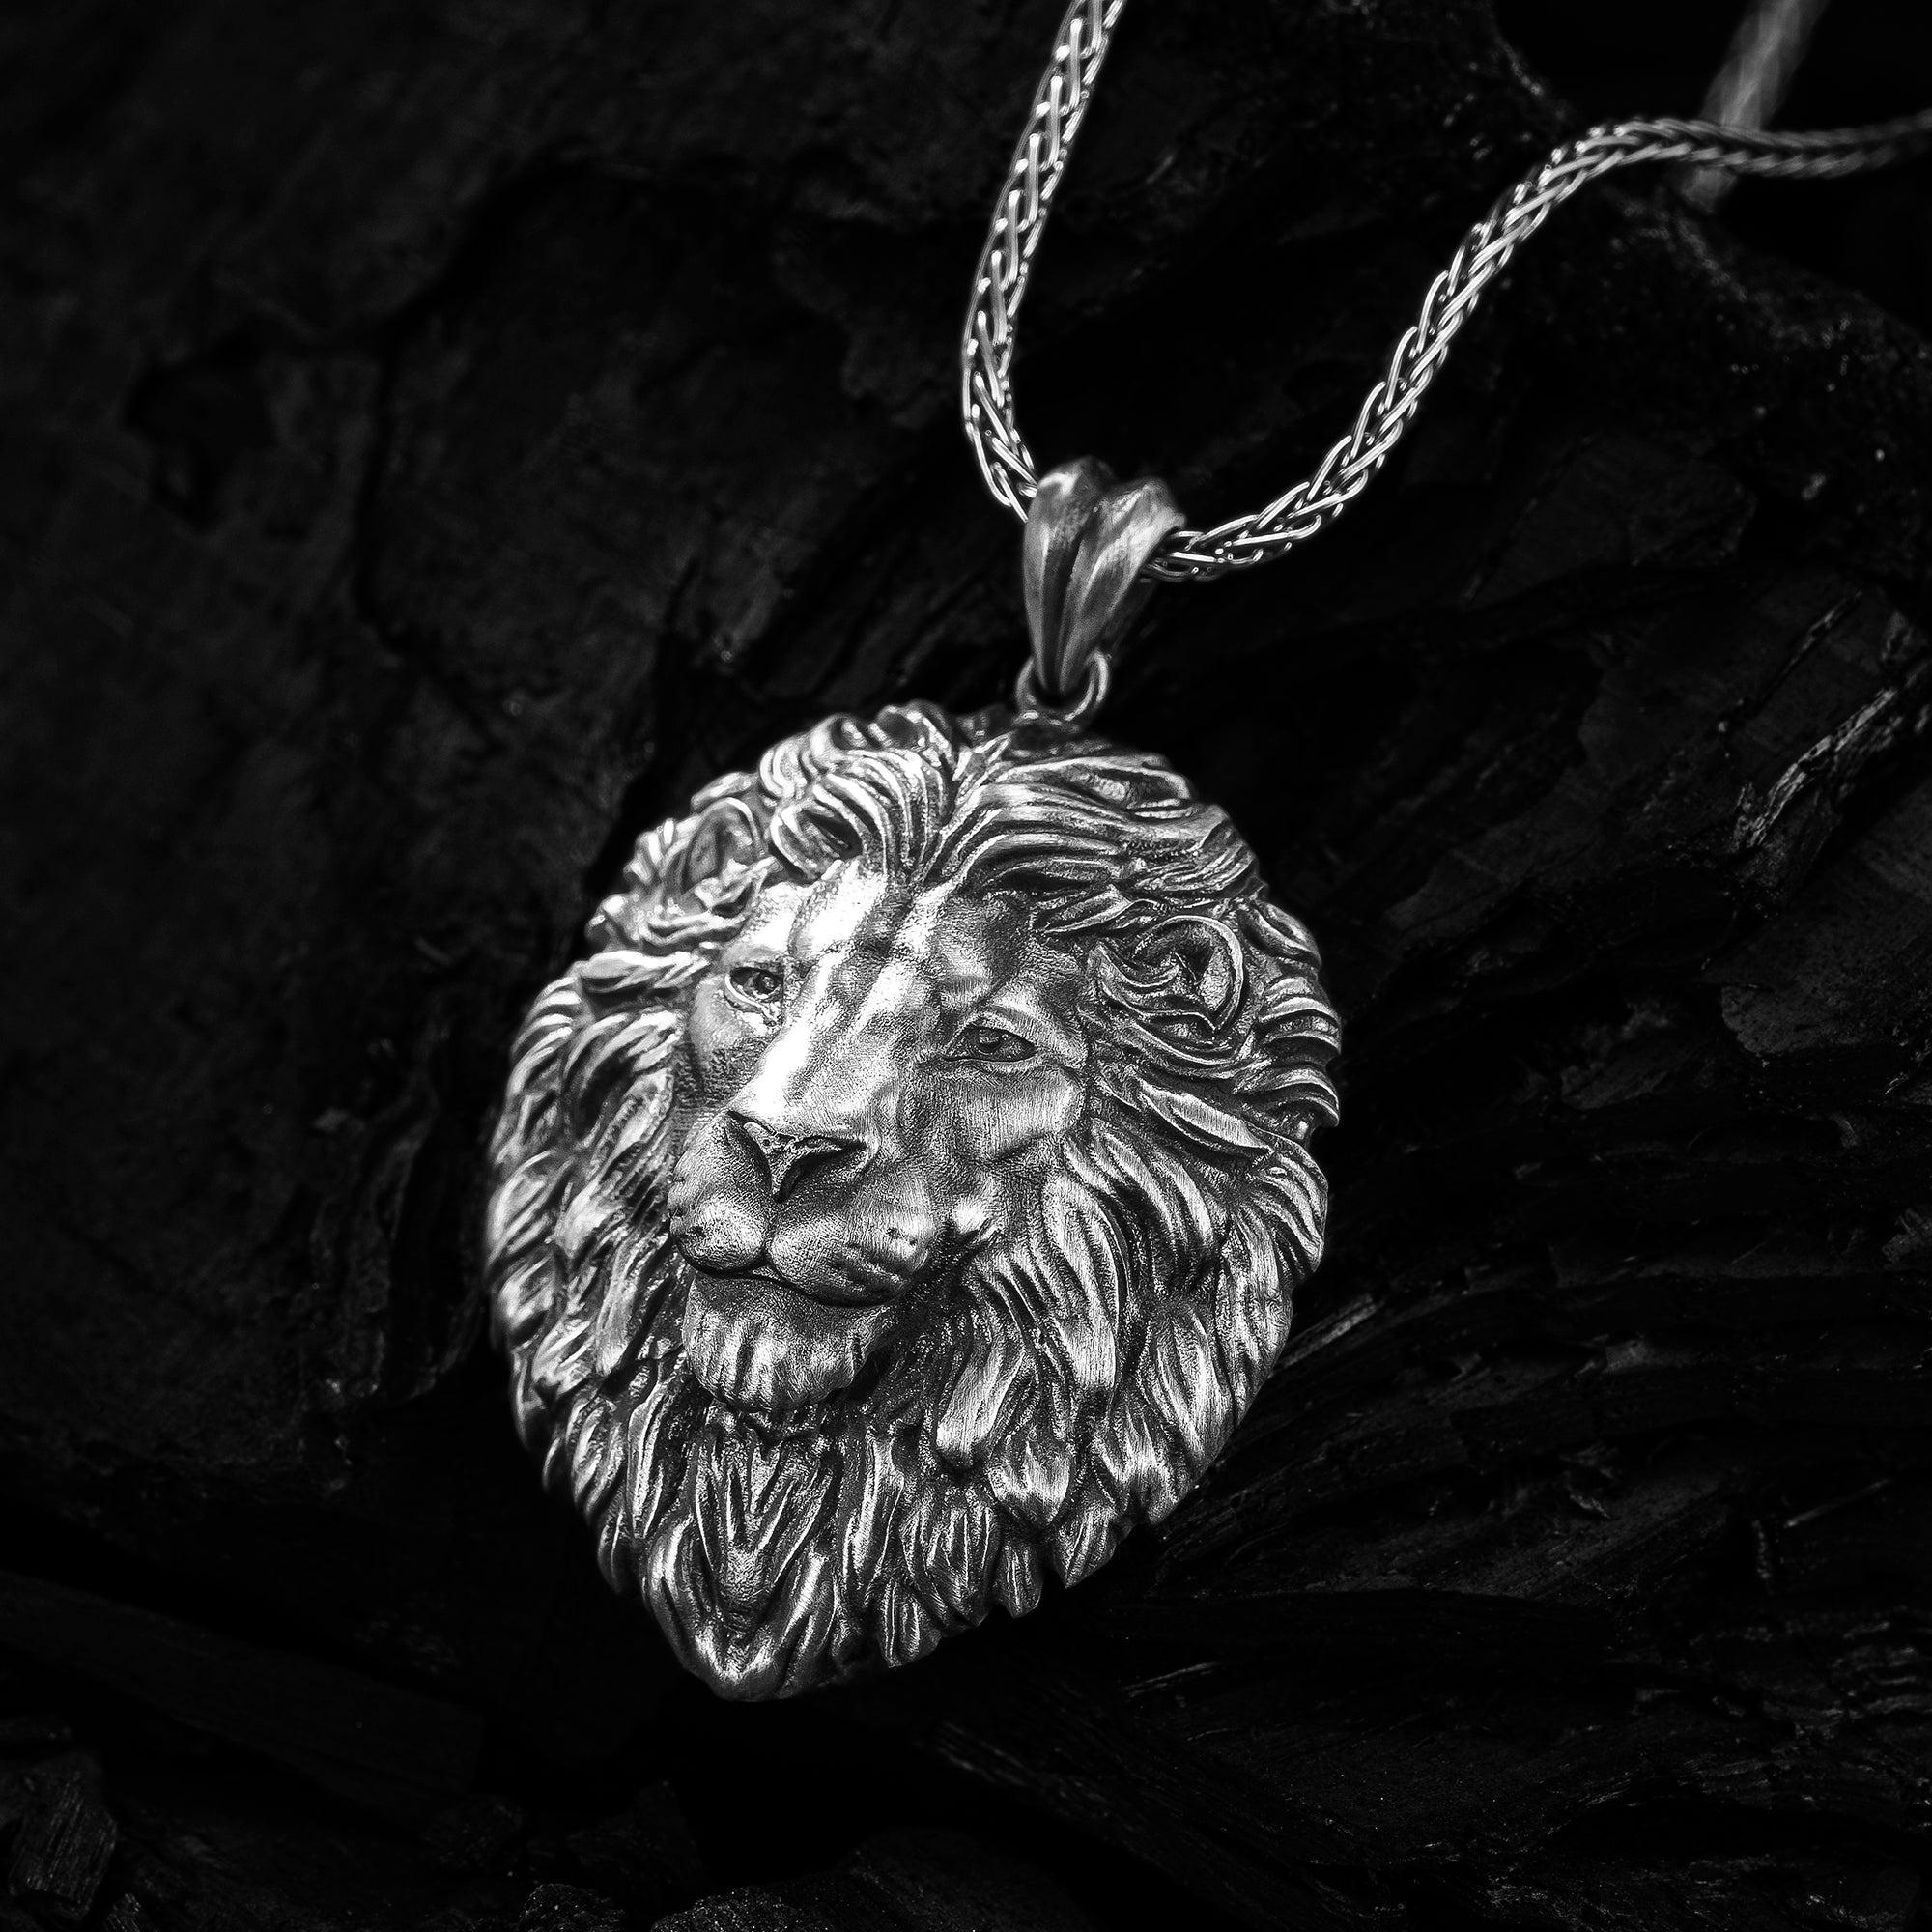 Maned Lion Head Necklace